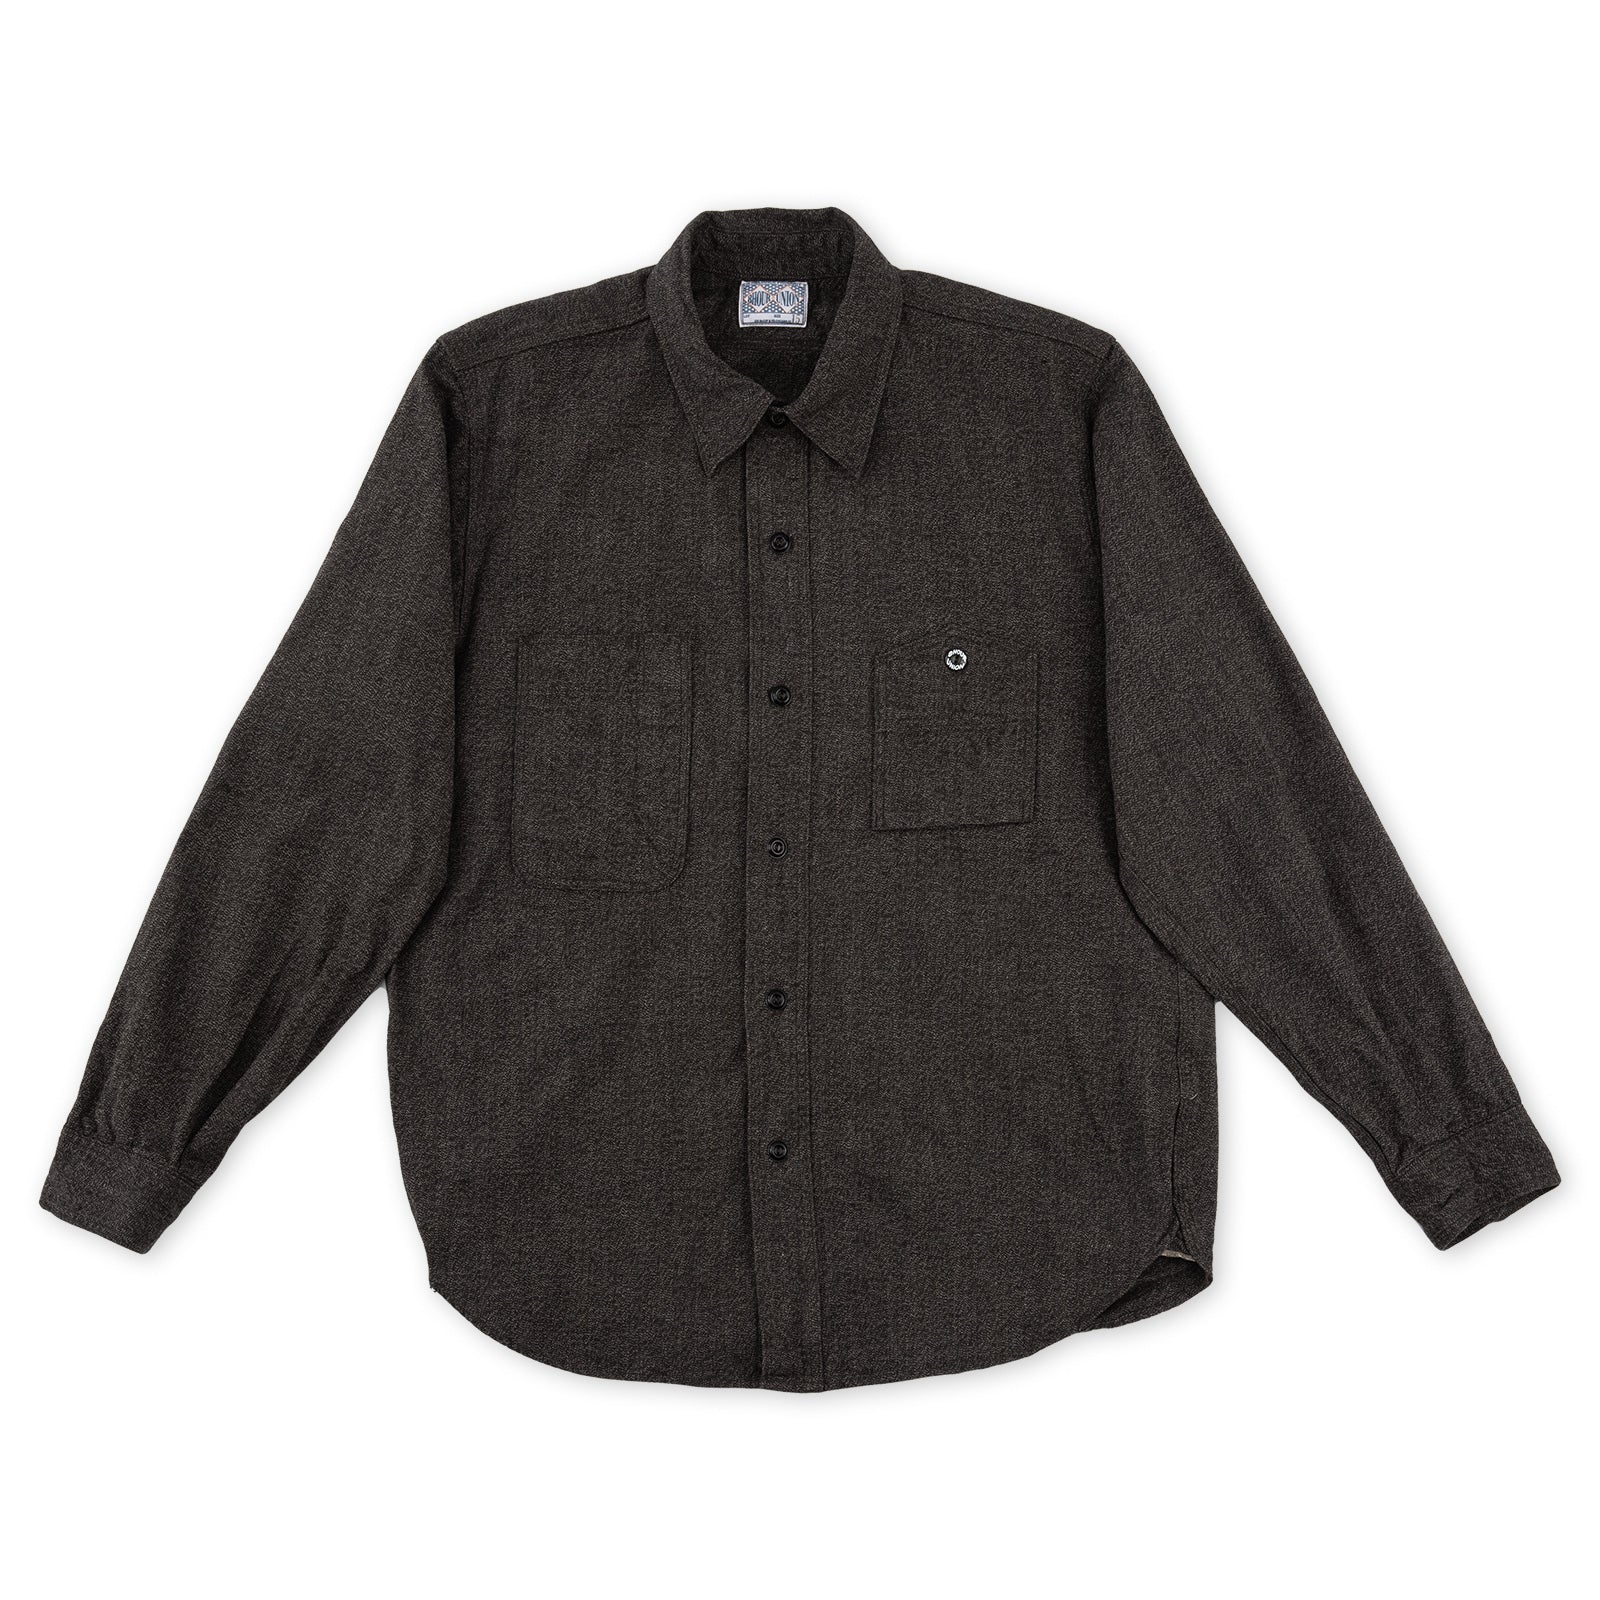 The Real McCoy's 8 Hour Union Twist Chambray Work Shirt - Black